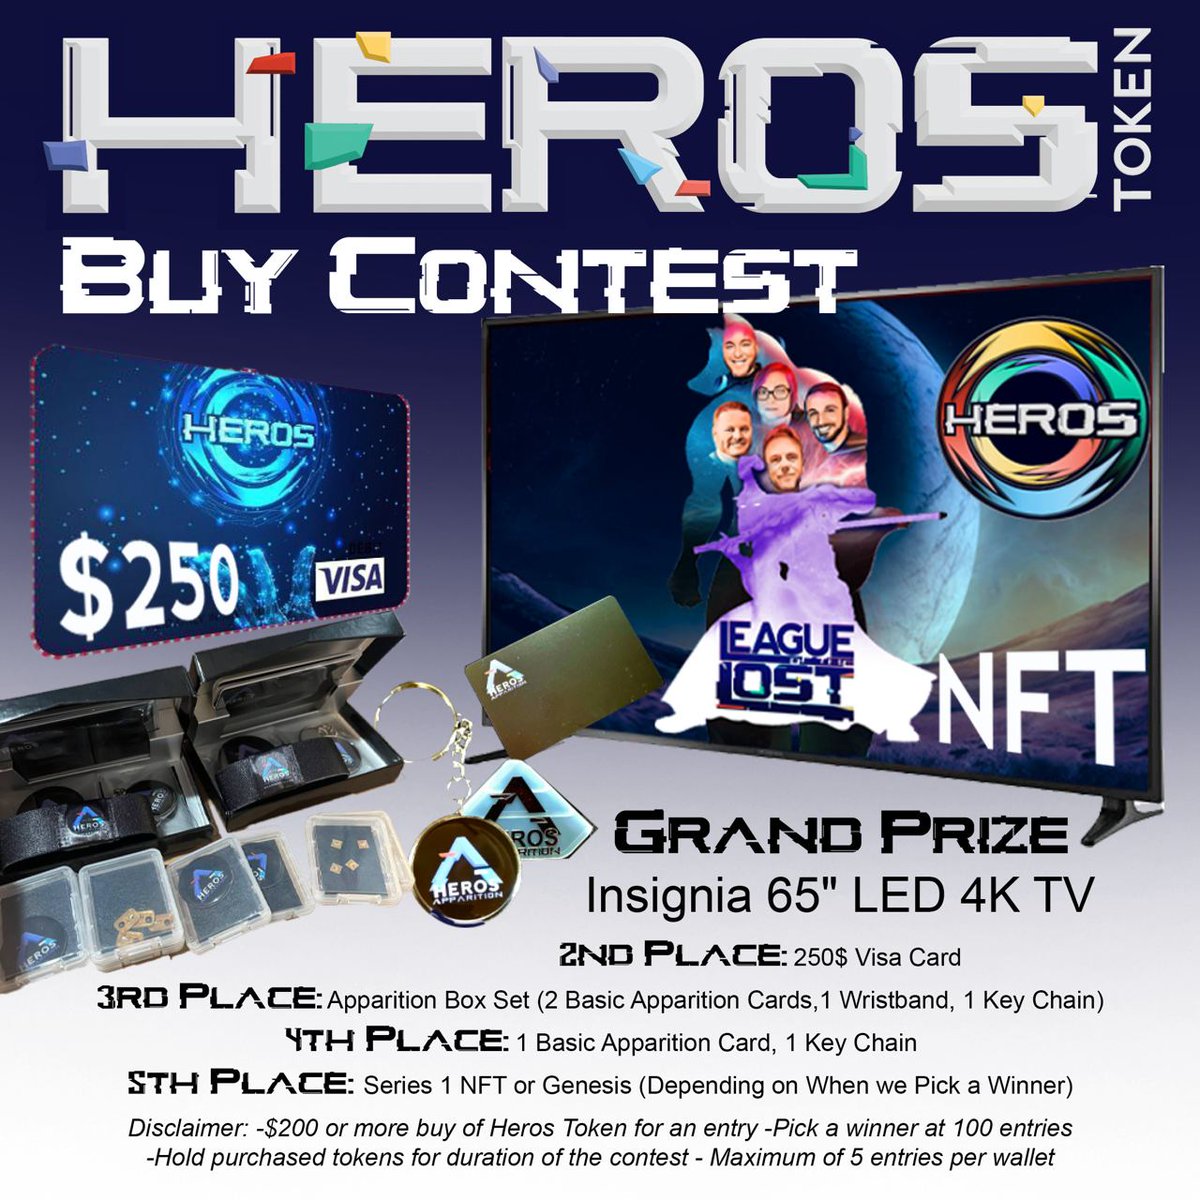 Great Opportunity to win exciting prizes with @HerosToken hero-universe.com BNB 🪙 0xD1673C00Ac7010bF2c376ebeA43633dd61A81016 ETH 🪙 0xb622400807765e73107B7196F444866D7EdF6f62 #cryptowithaheart @cctip_com airdrop 1.5 DOGE 150 #cryptowithaheart